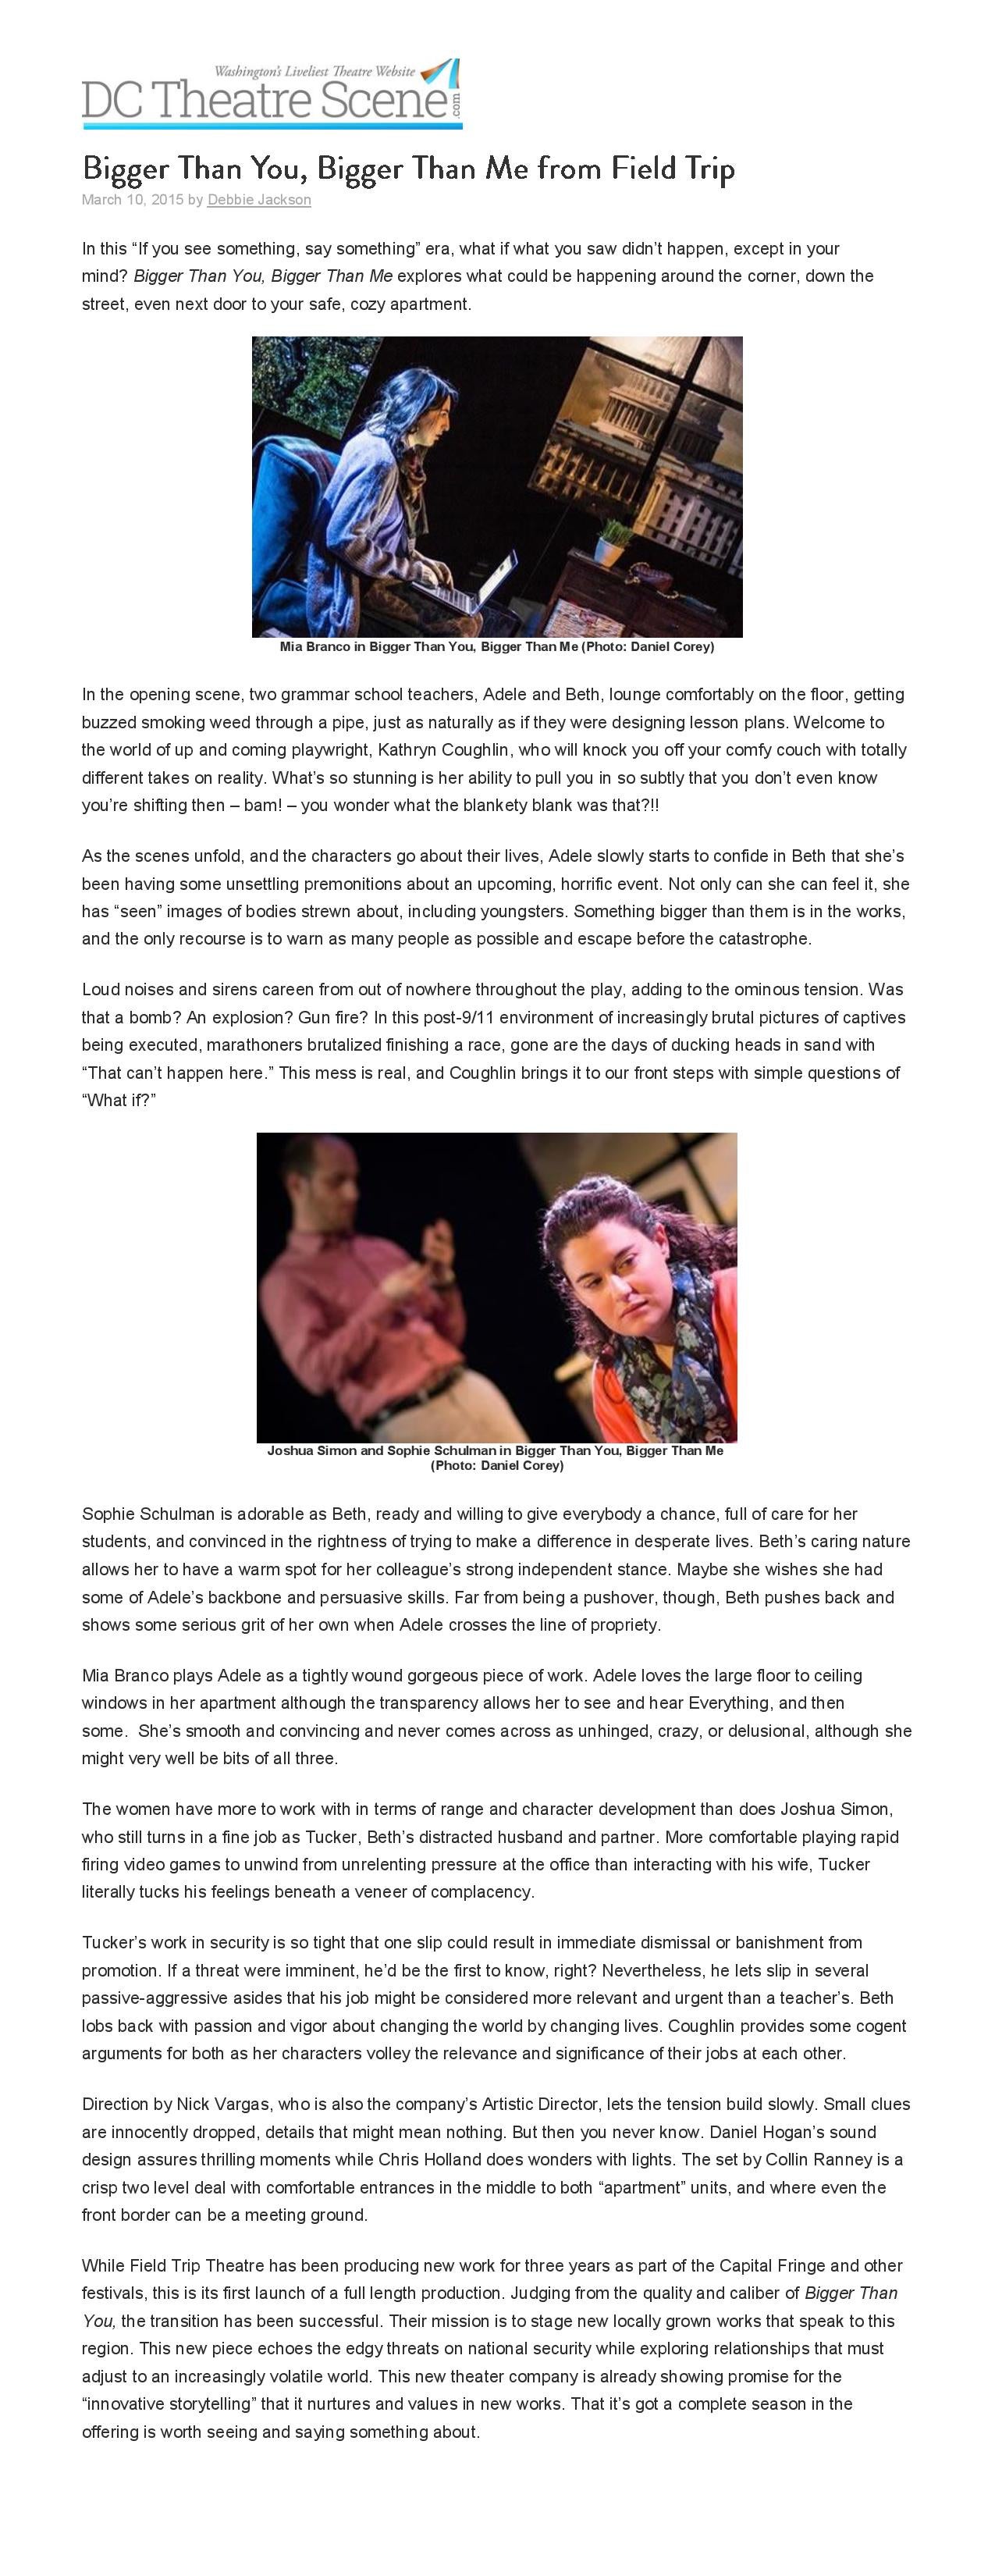 DC Theater Scene Bigger Than You March 2015-page-001 (1)